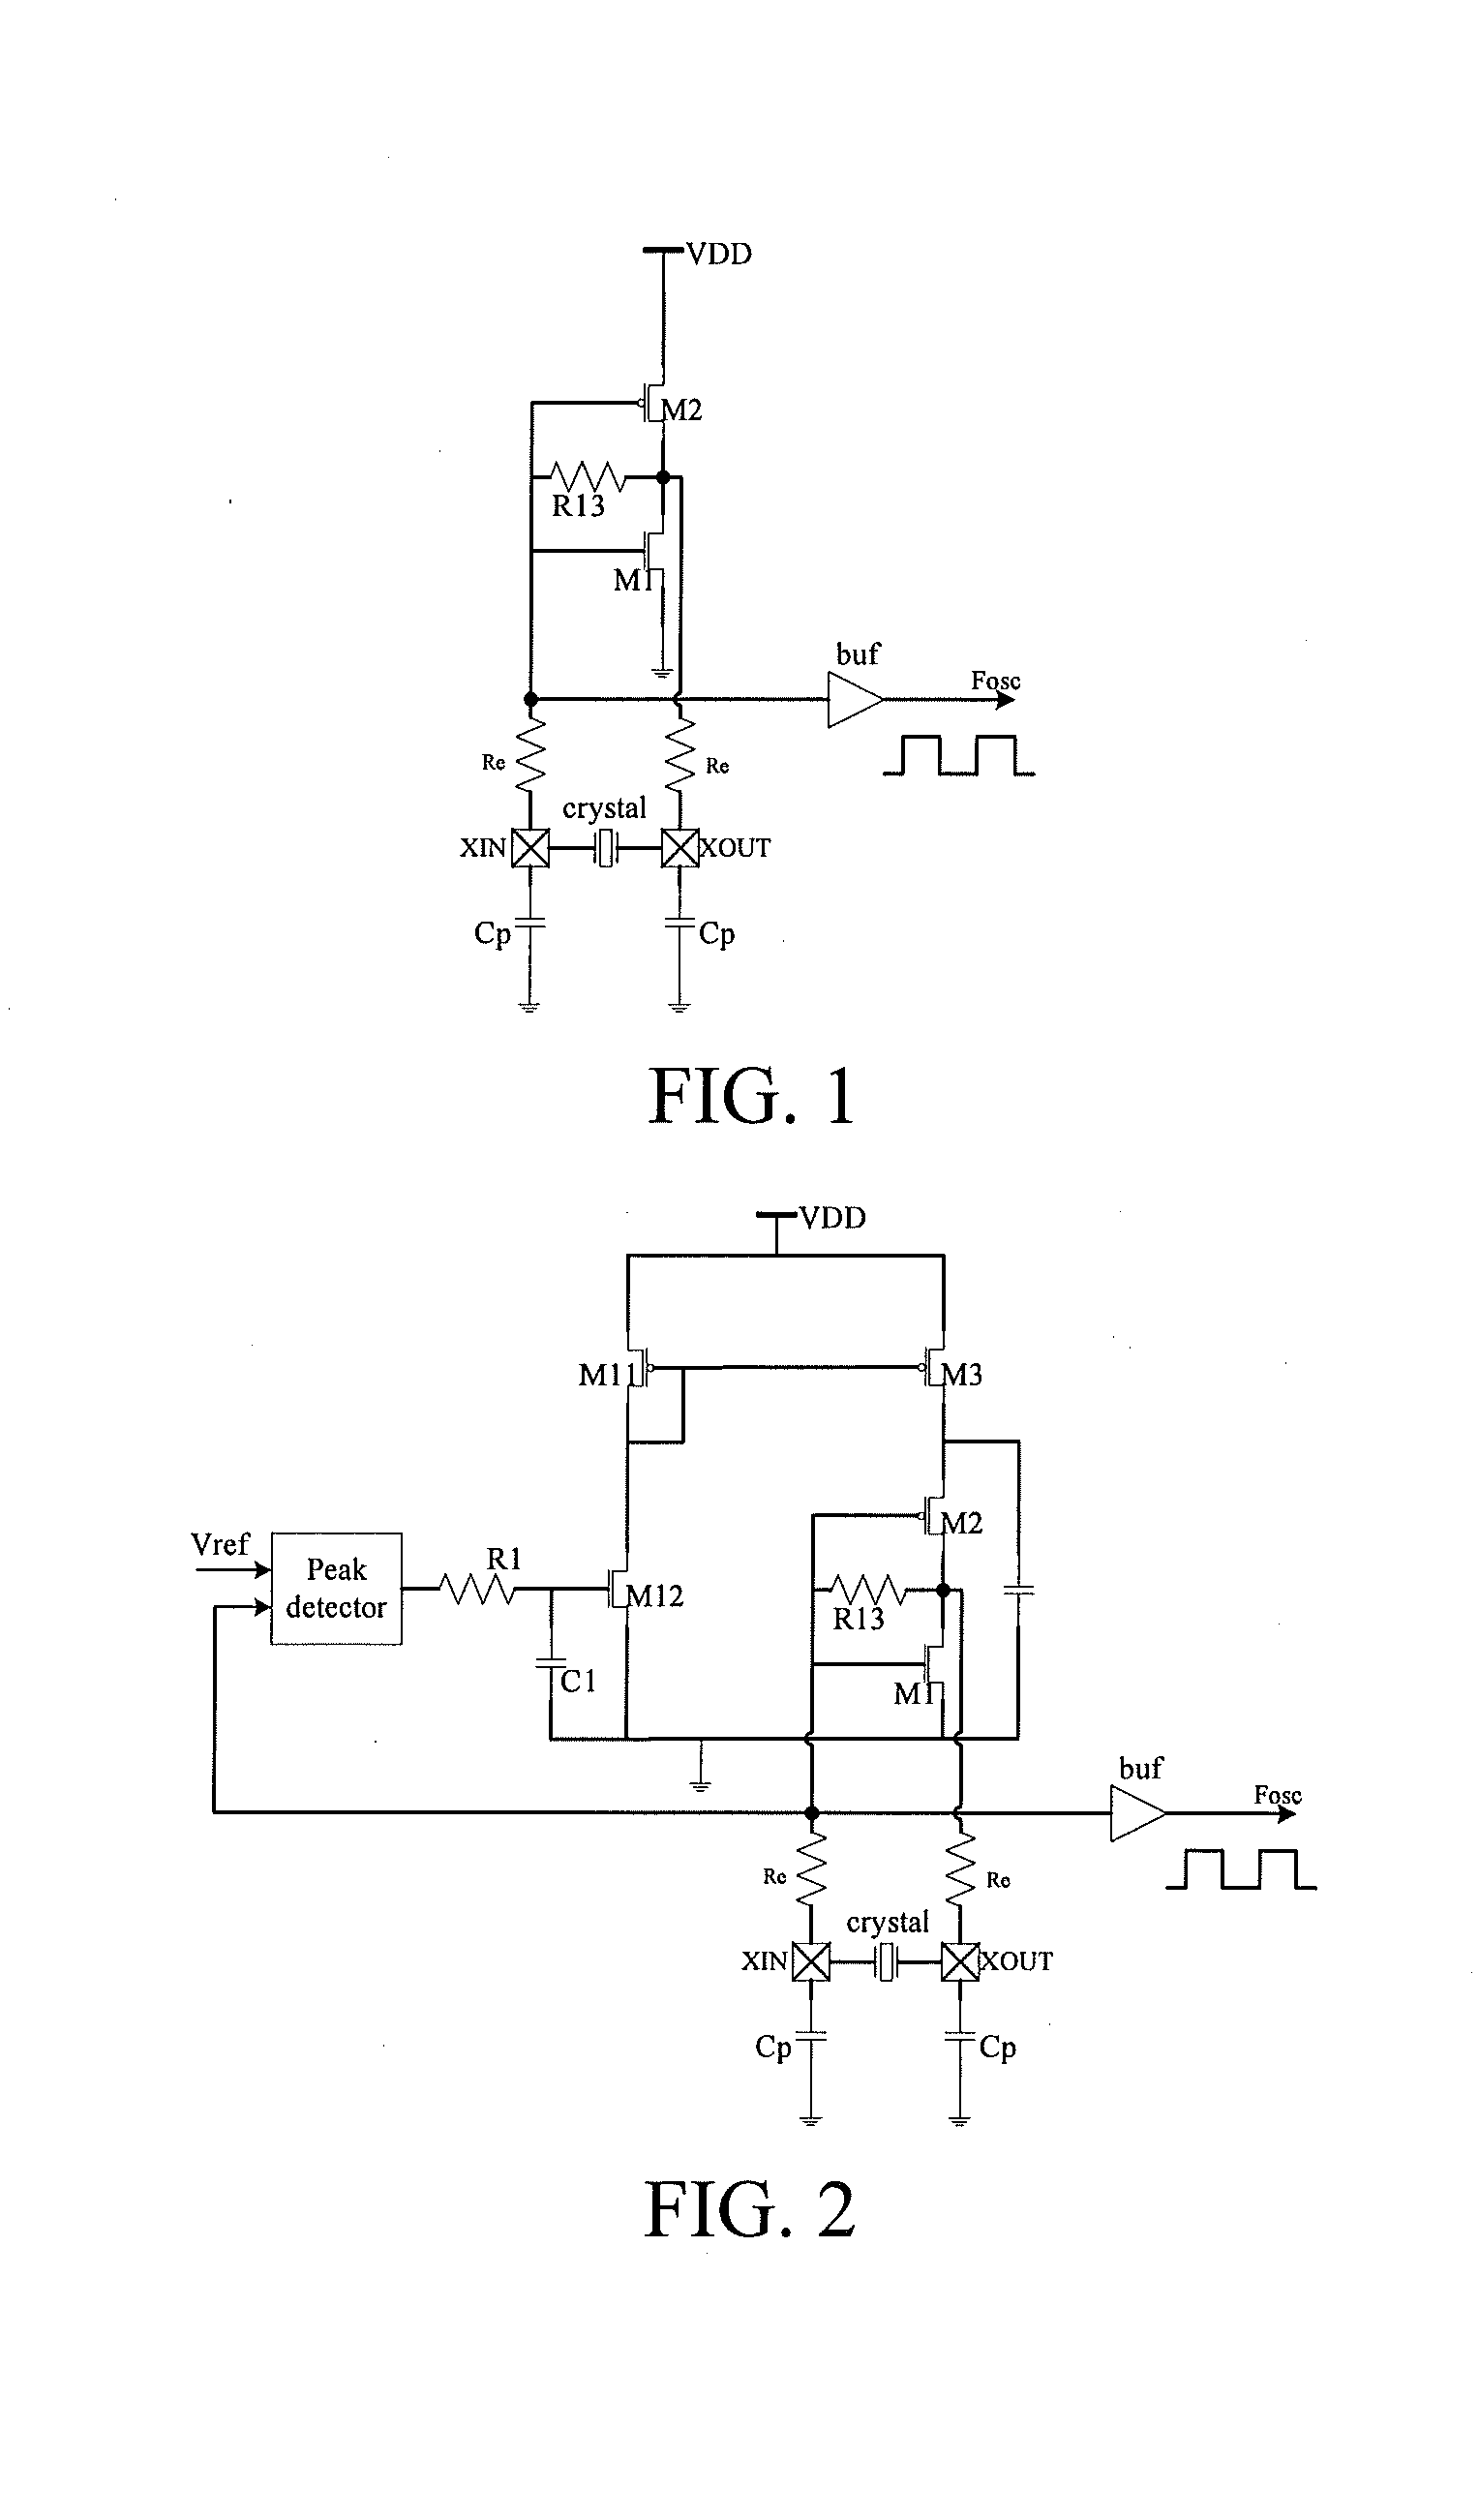 Crystal oscillator circuit having low power consumption, low jitter and wide operating range